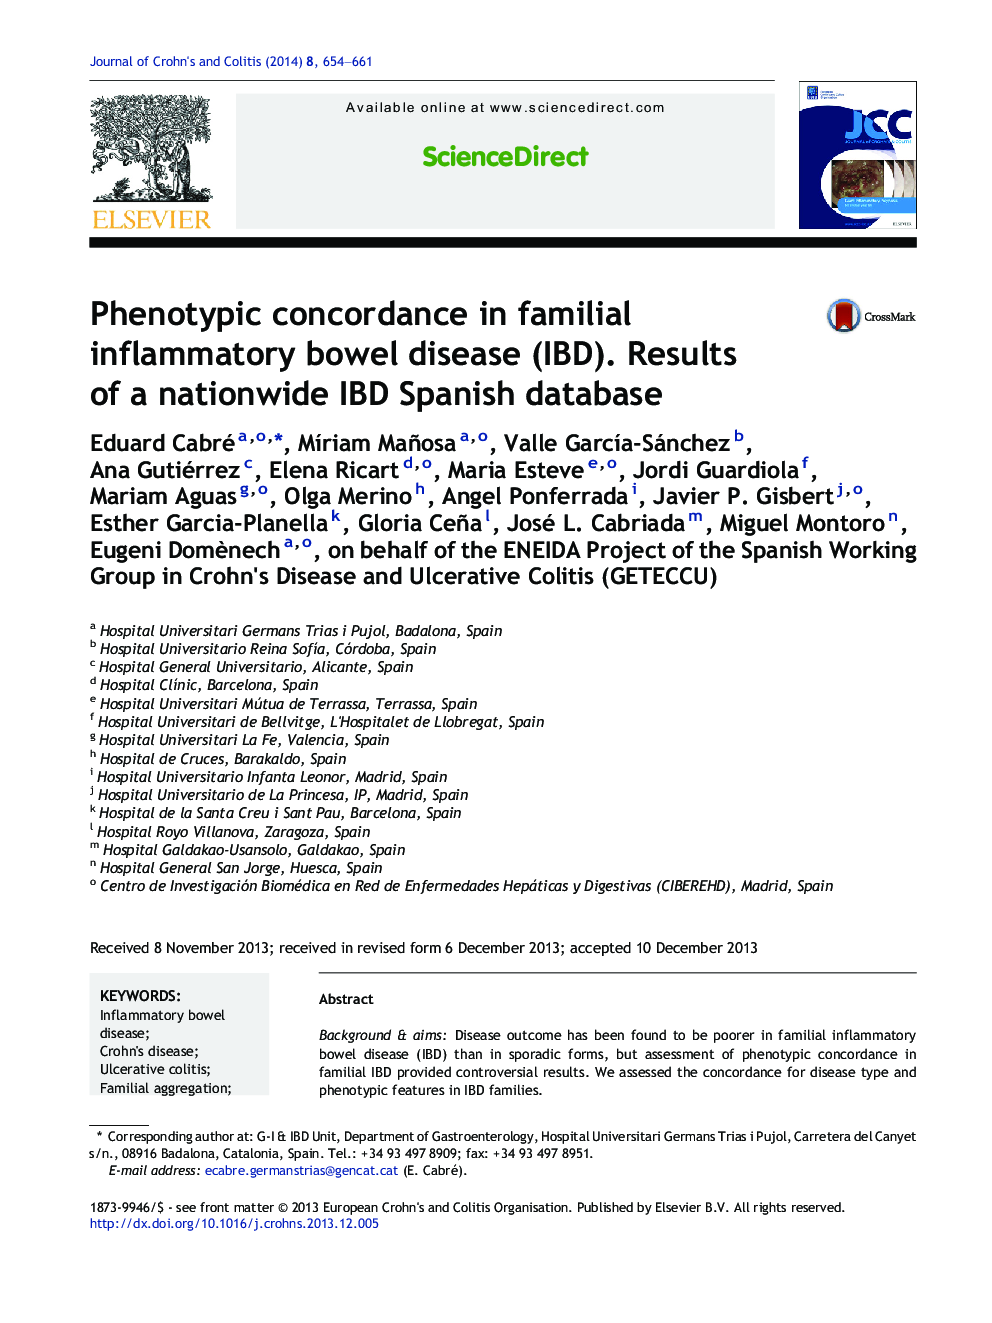 Phenotypic concordance in familial inflammatory bowel disease (IBD). Results of a nationwide IBD Spanish database